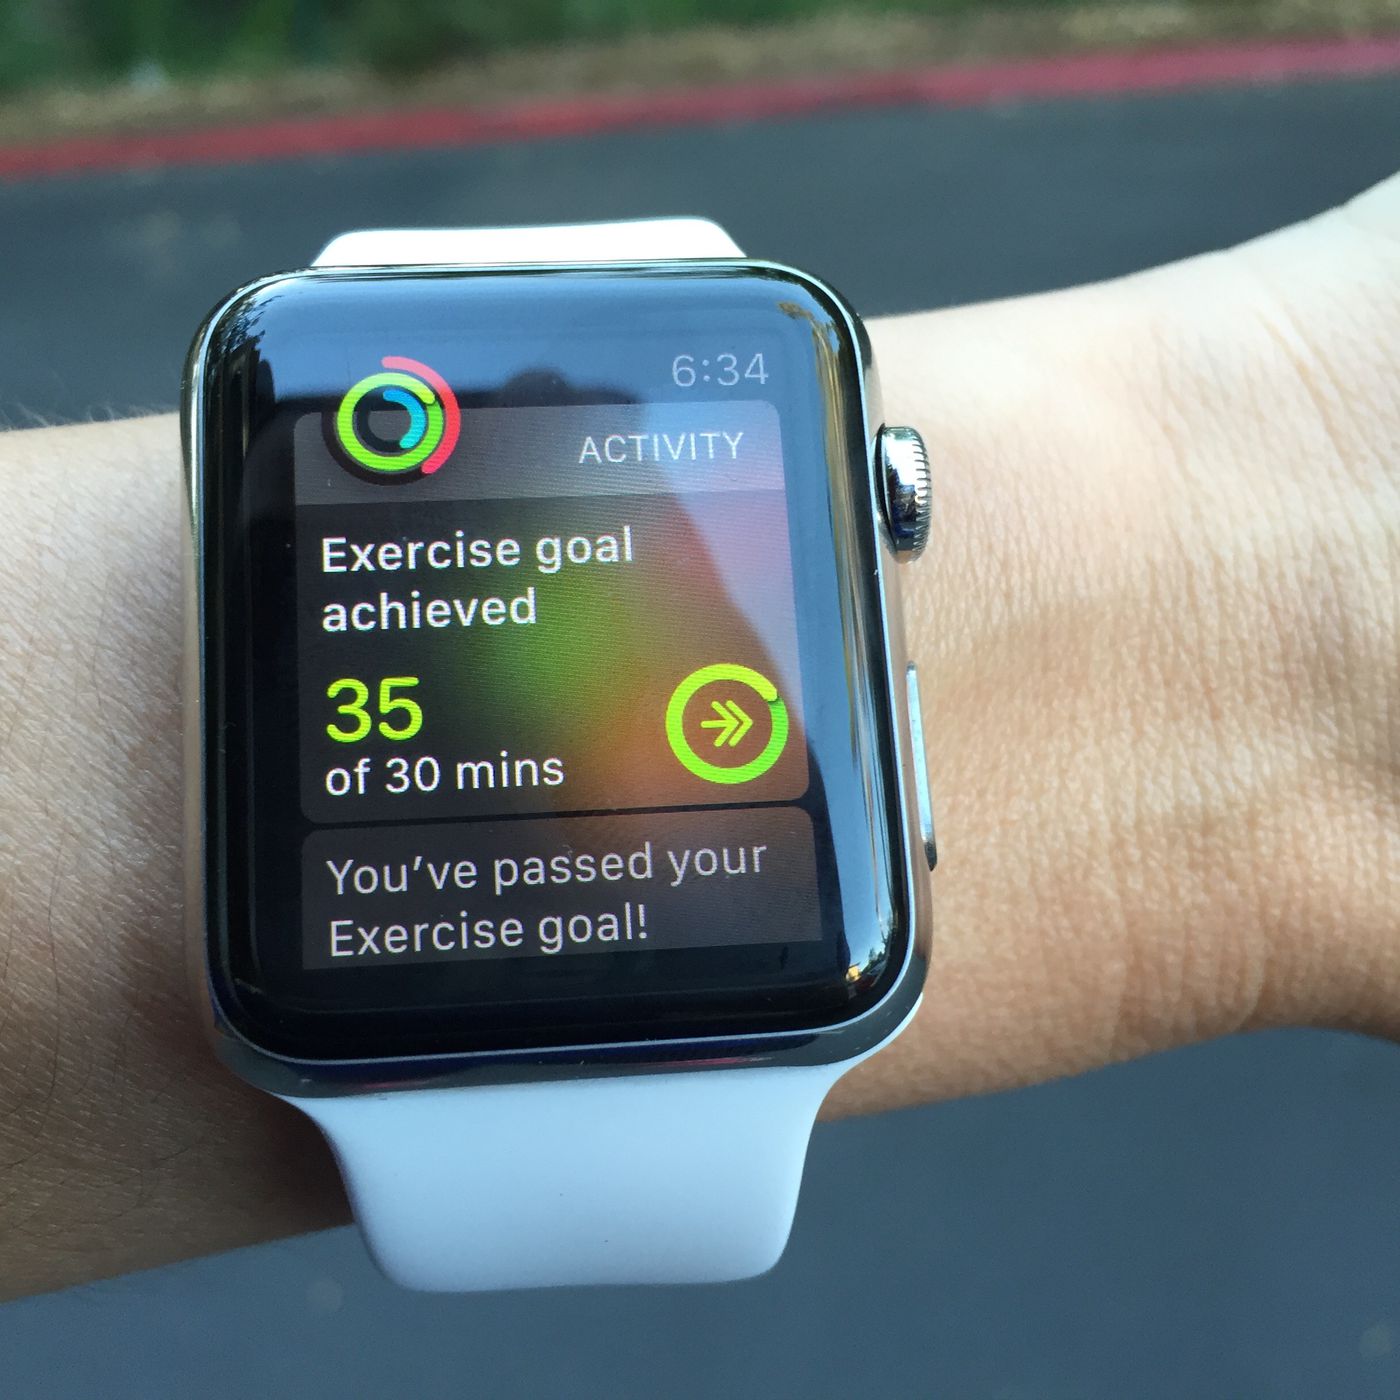 Rusland Arbejdsgiver Autonomi How Does Apple Watch Stack Up as a Health-and-Fitness Tracker? - Vox